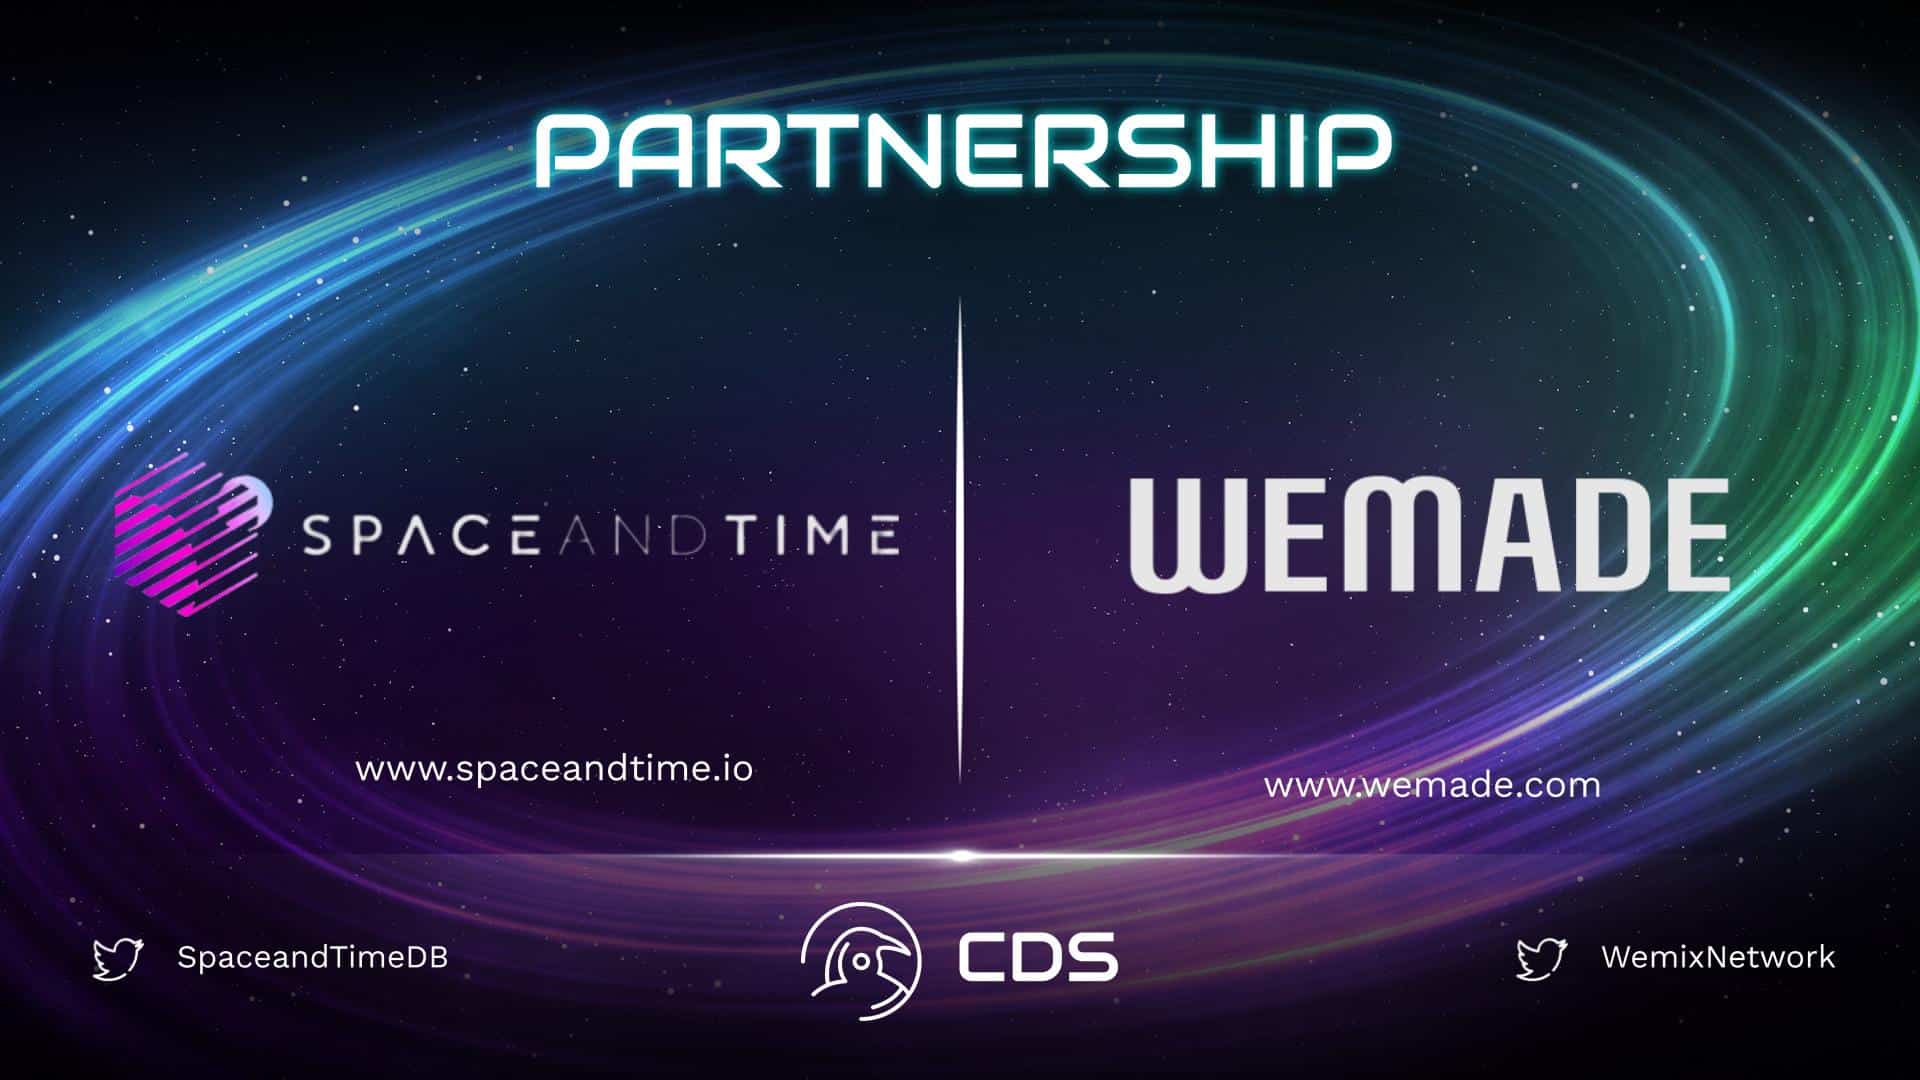 Space and Time Partners with Wemade